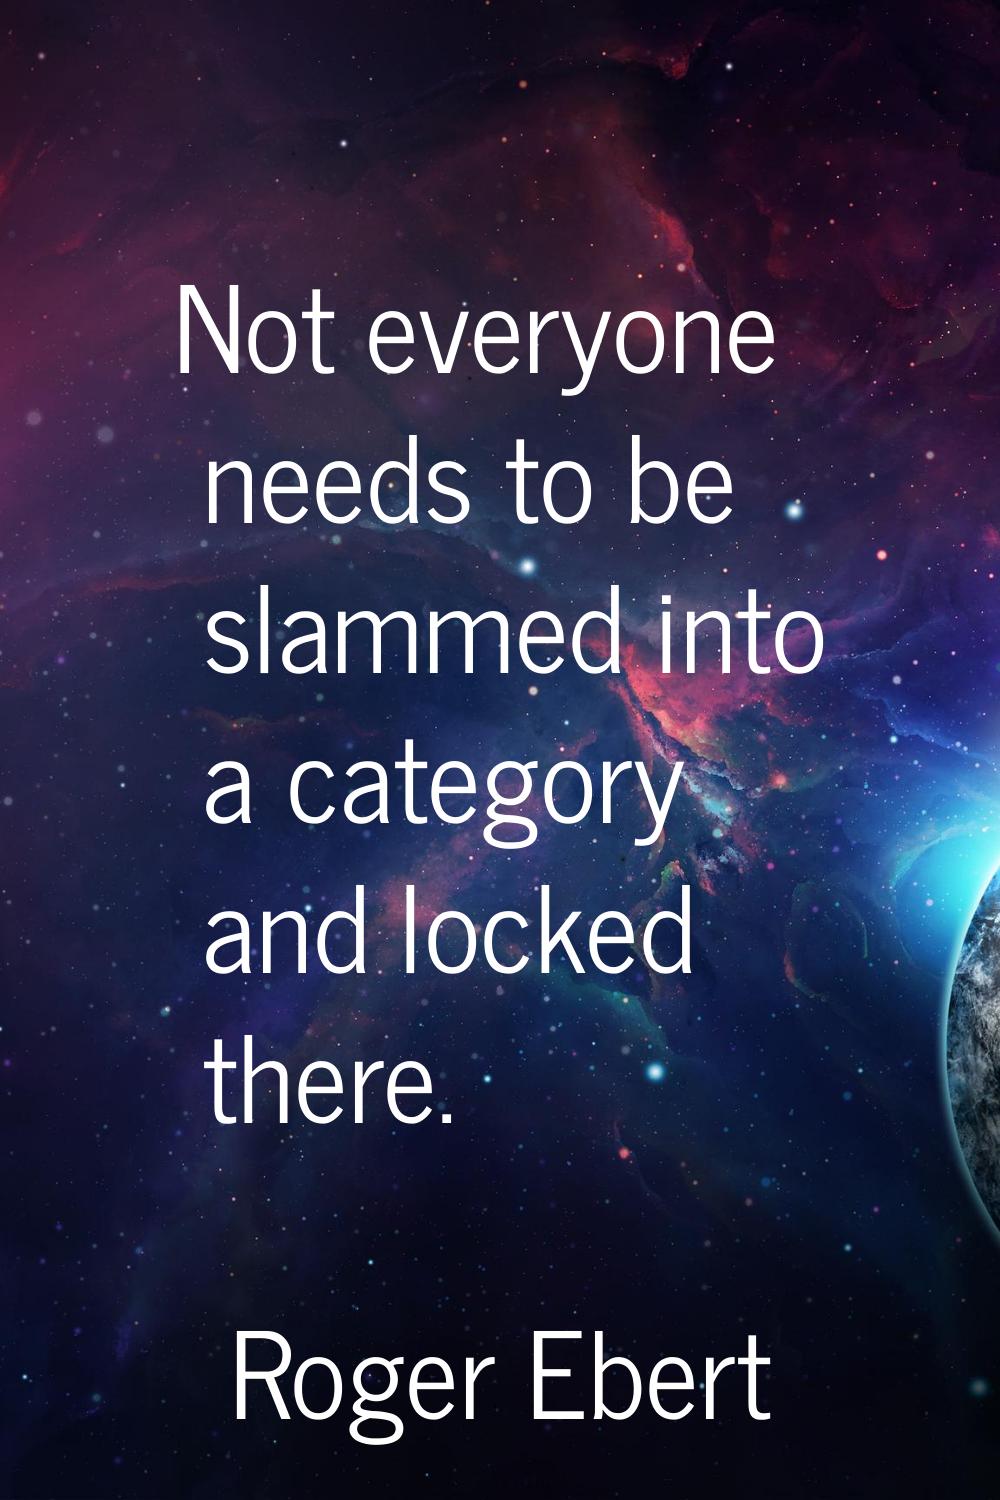 Not everyone needs to be slammed into a category and locked there.